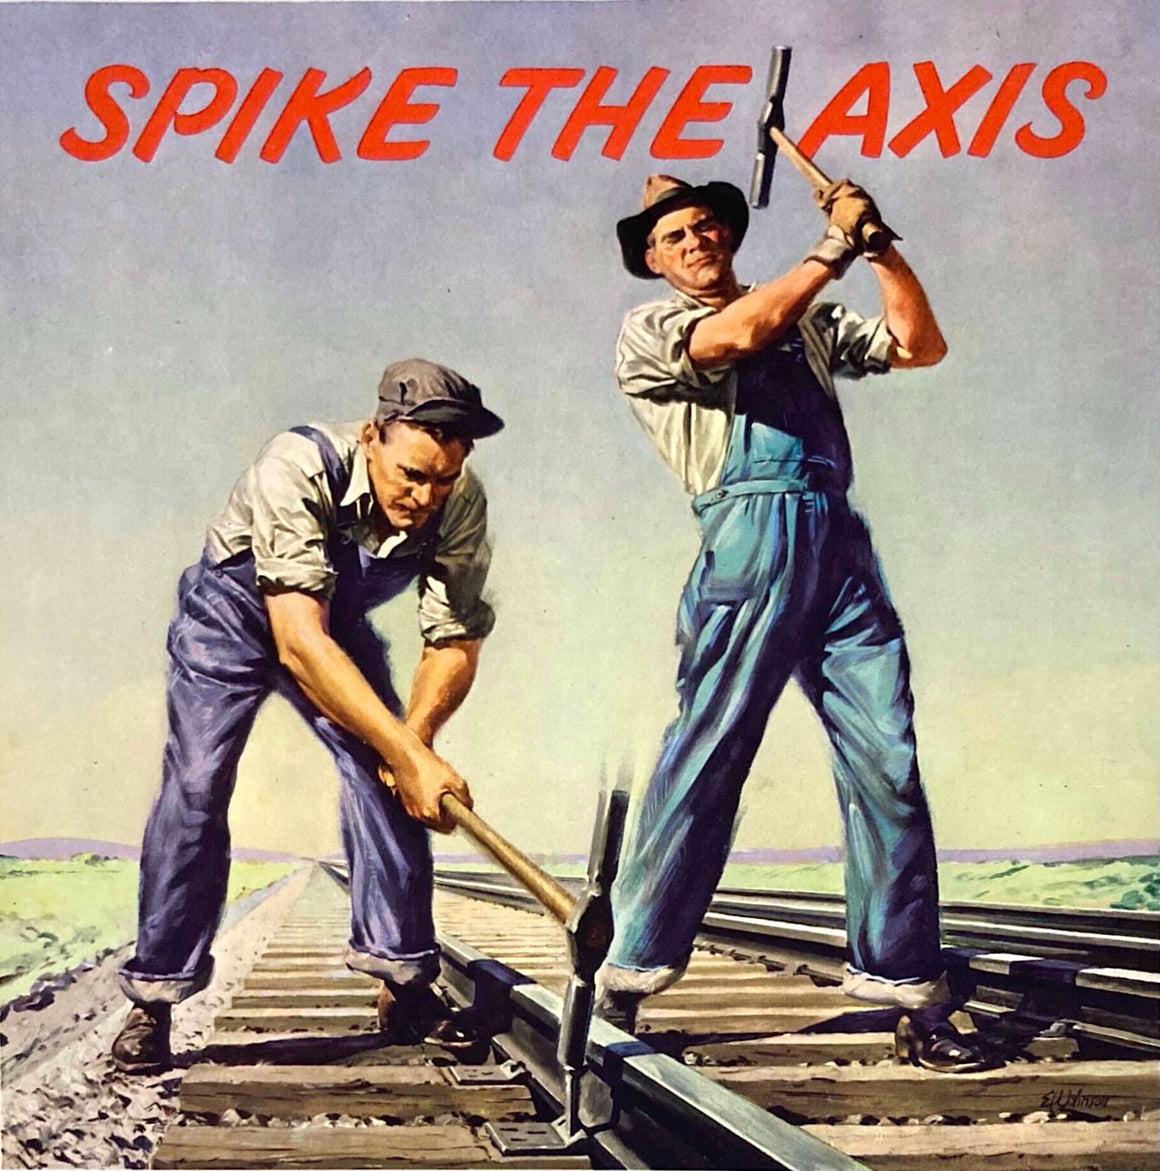 "Spike the Axis with War Bonds. Boost Your Payroll Savings" Vintage WWII Bonds Poster, 1944